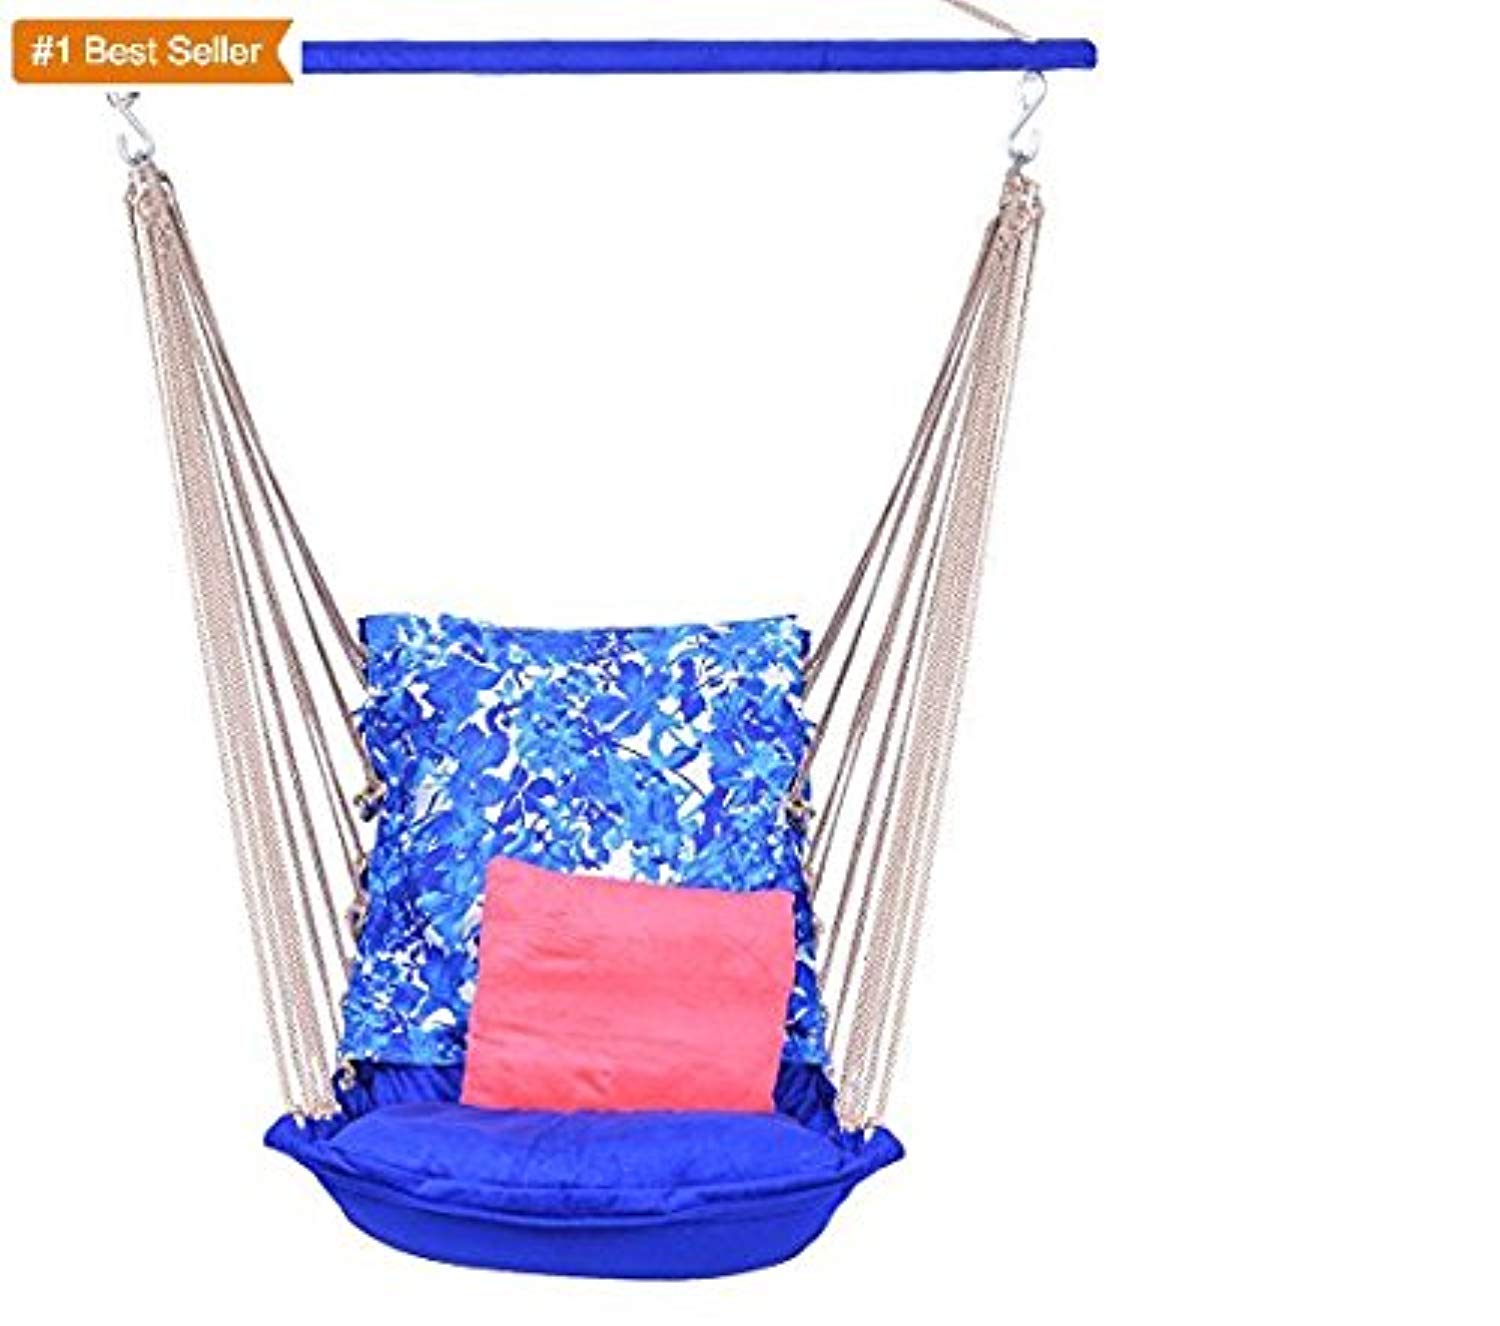 IRA Swing Chair and Hammock Velvet Decent with Cushion (63x84x174 cm, Multicolour) - IRA Furniture